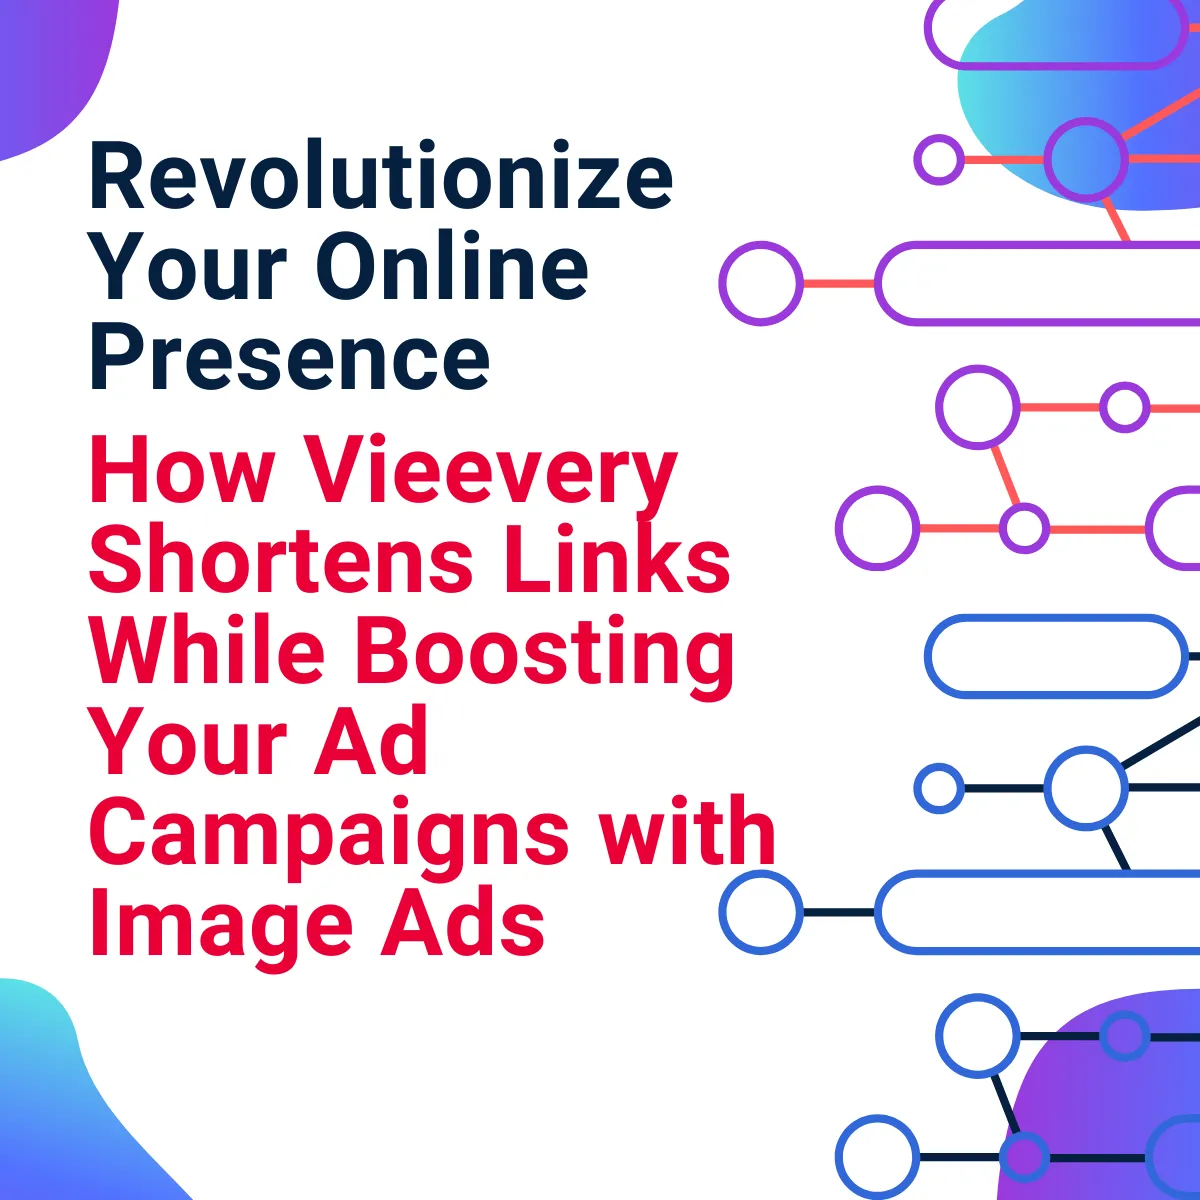 Revolutionize Your Online Presence: How Vieevery Shortens Links While Boosting Your Ad Campaigns with Image Ads